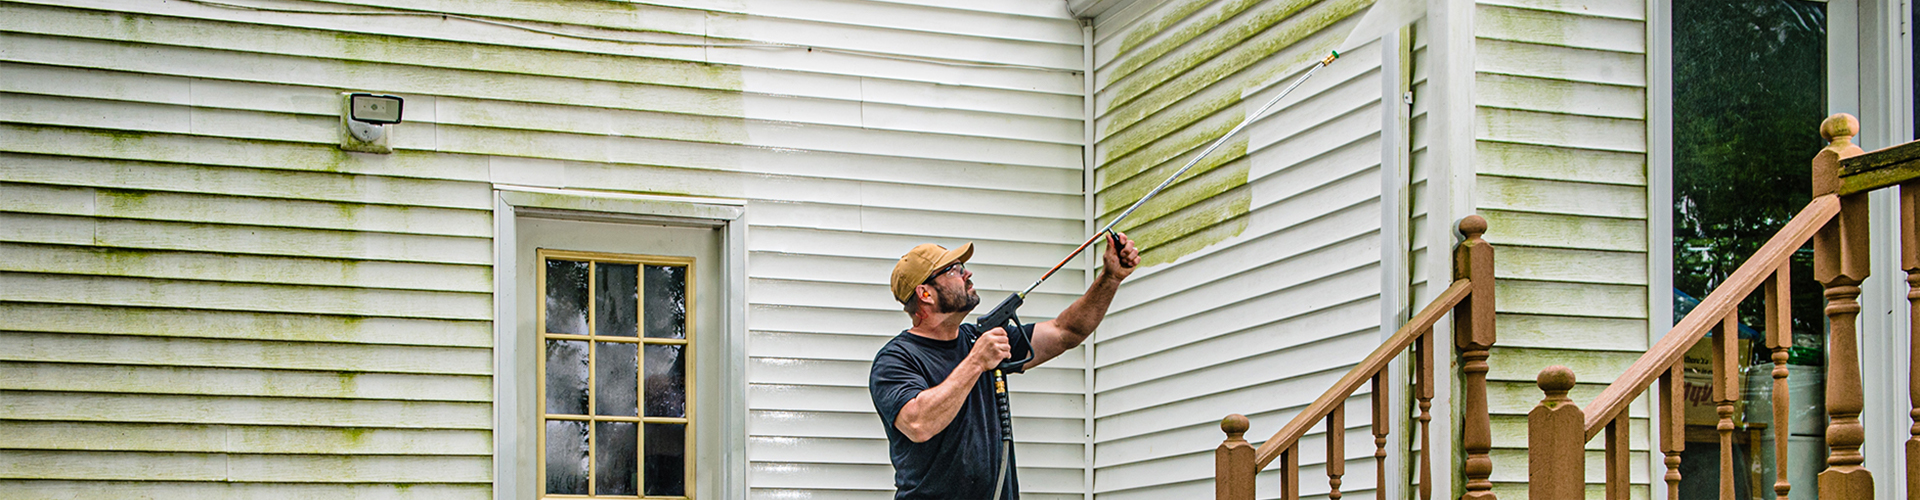 Cleaning Siding with Mi-T-M Pressure Washer